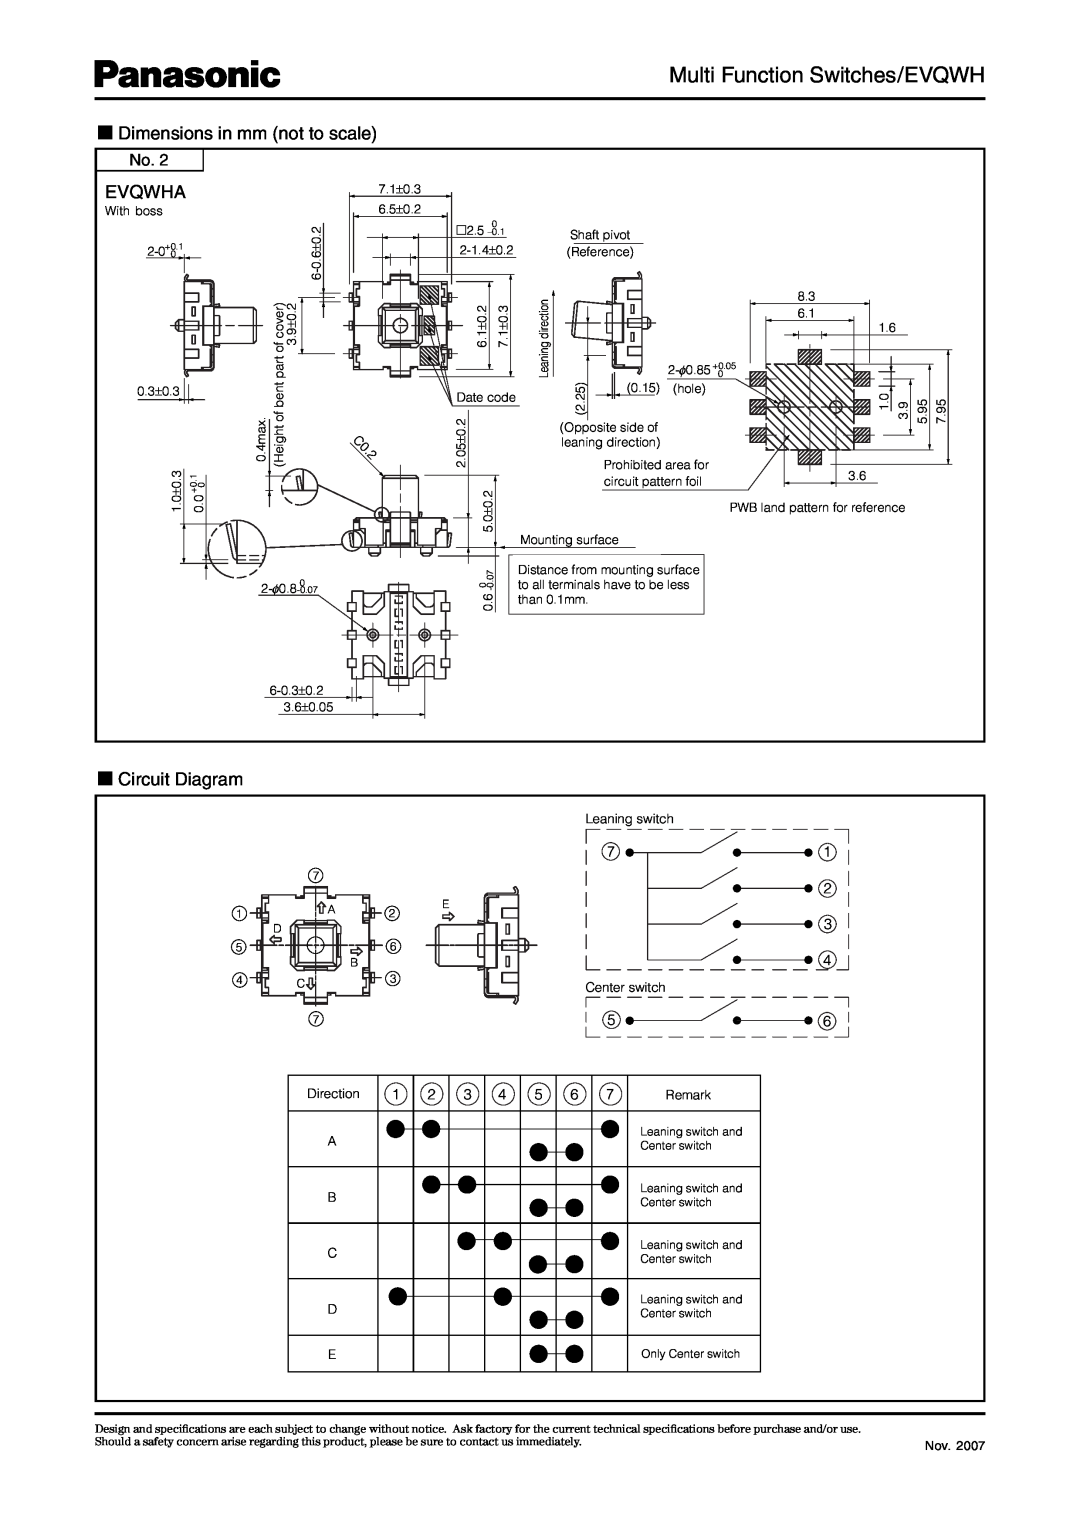 Panasonic Multi Function Switches/EVQWH, EVQWHA7.1±0.3, Circuit Diagram, Dimensions in mm not to scale, Leaning switch 